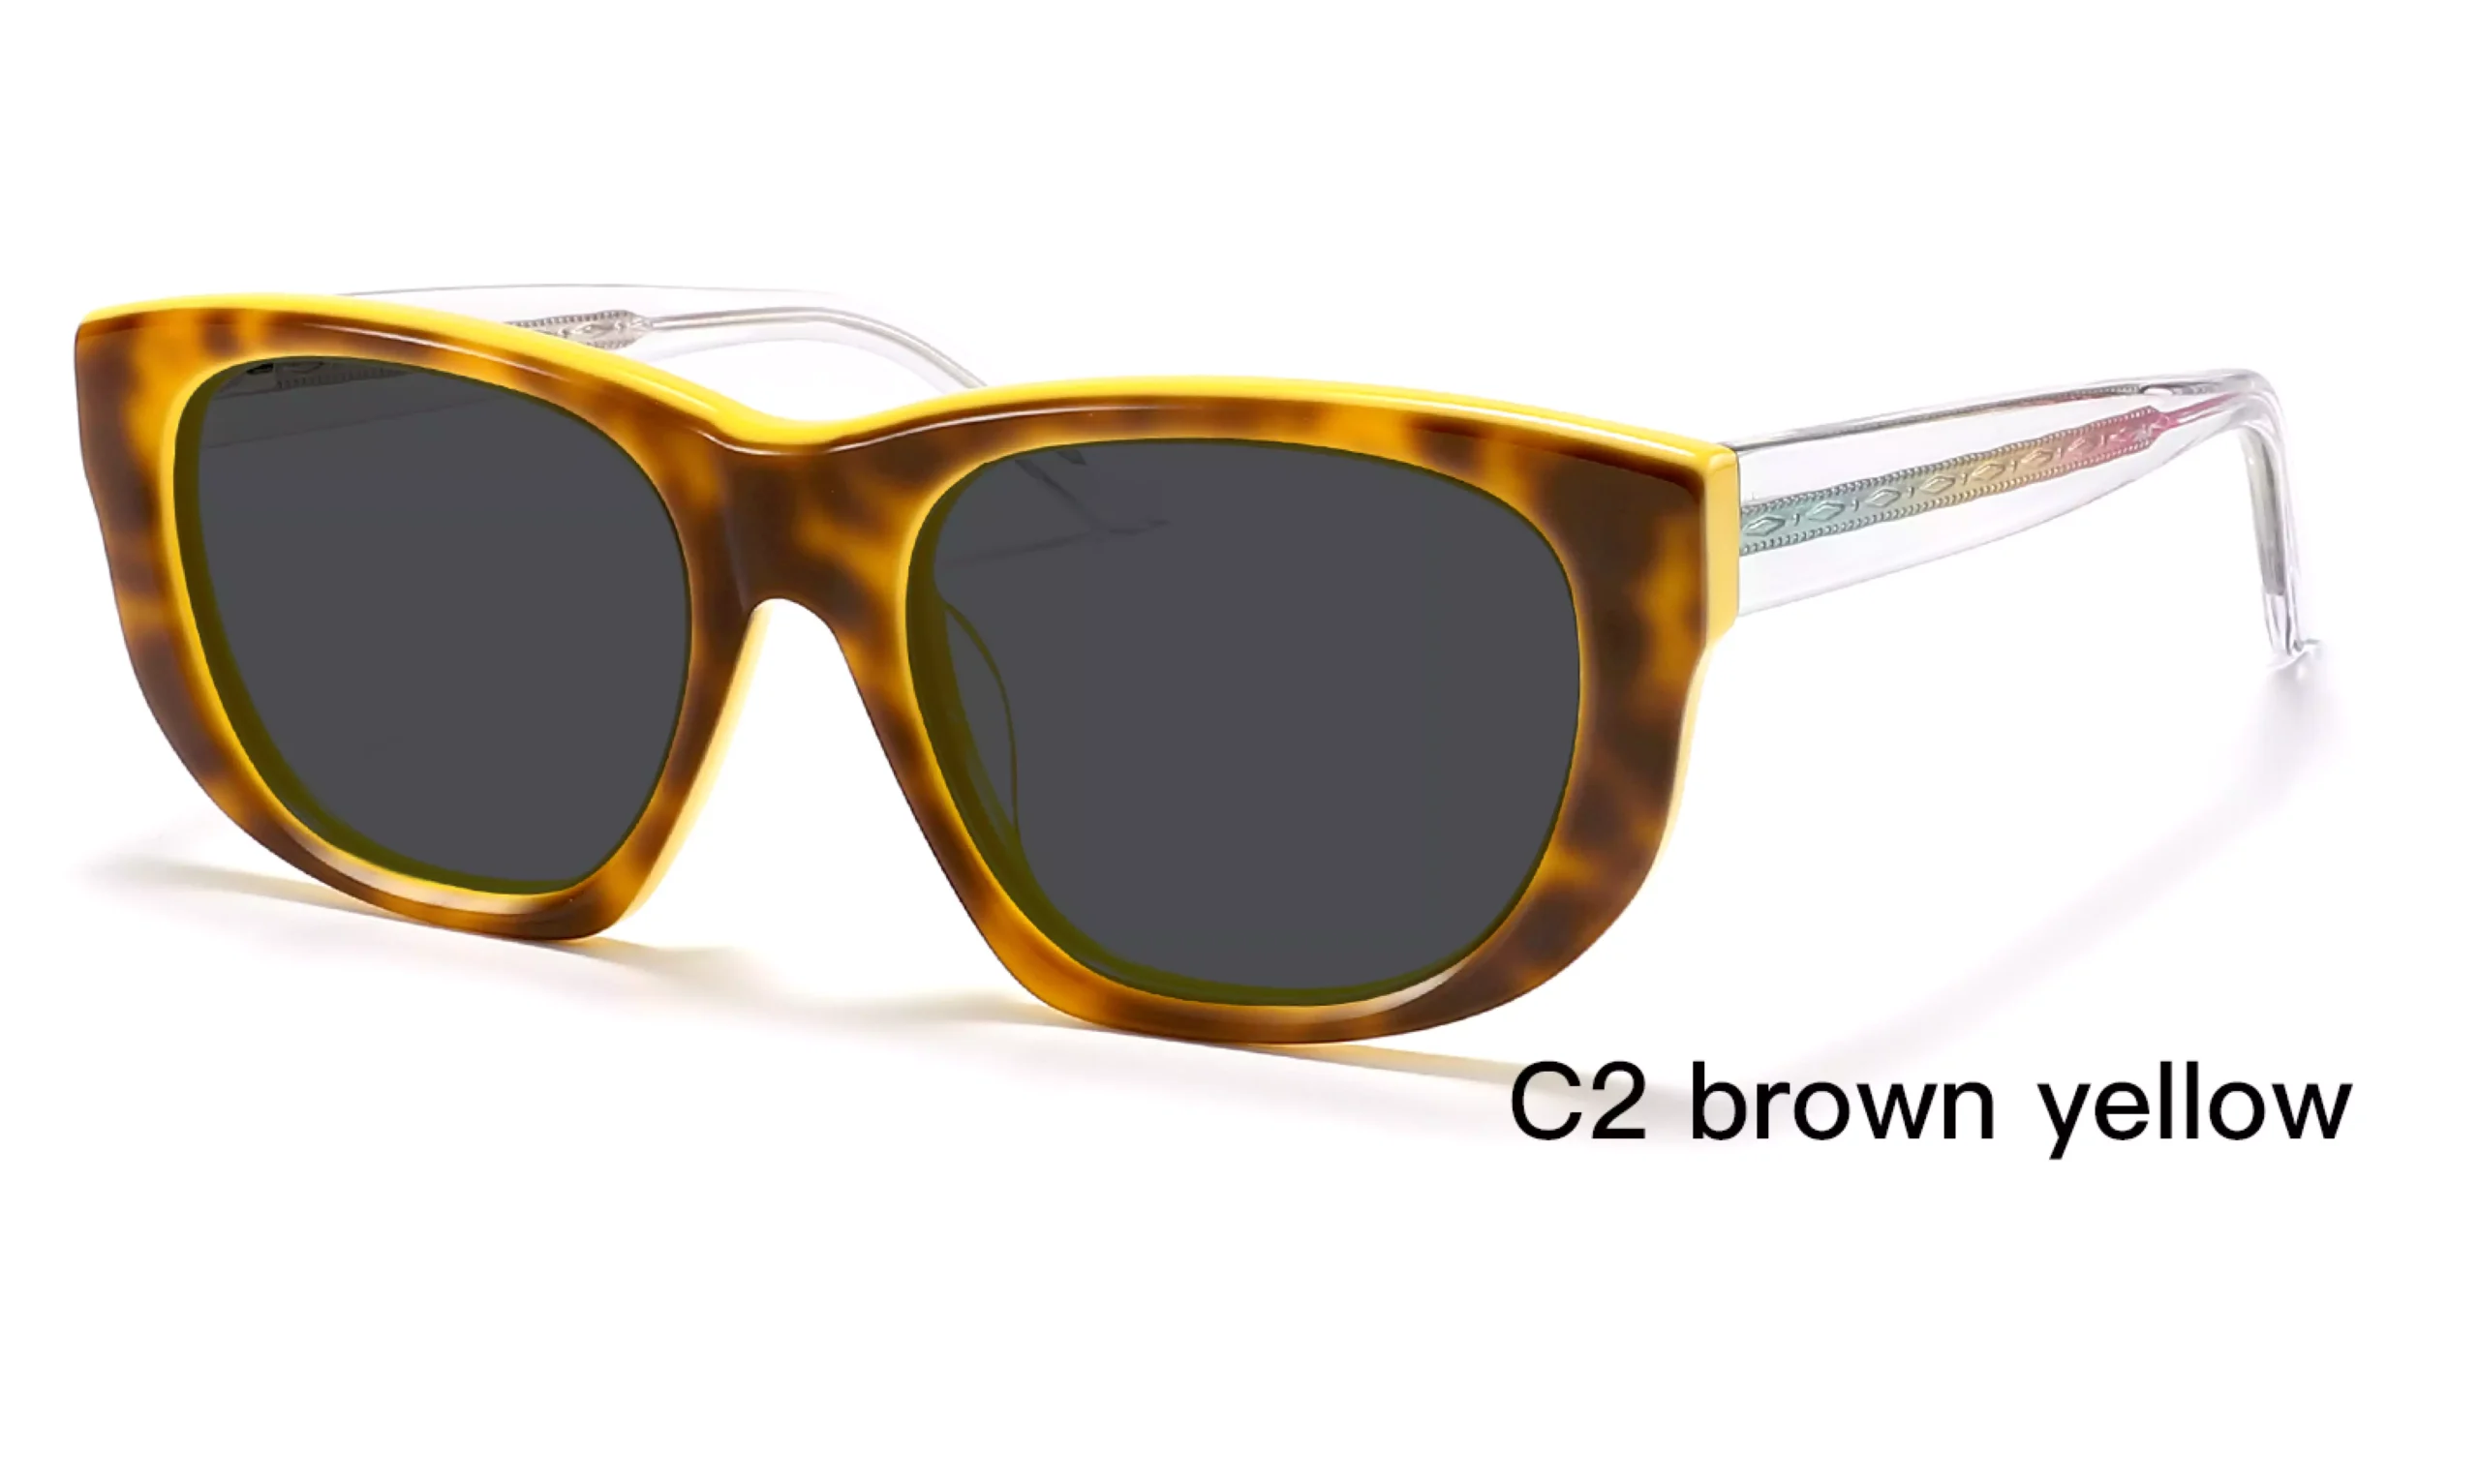 Wholesale, brown yellow, Clear temple, Oval, Sunglasses,45 degree display, laser engraved wire core, gradient, diamond patterns